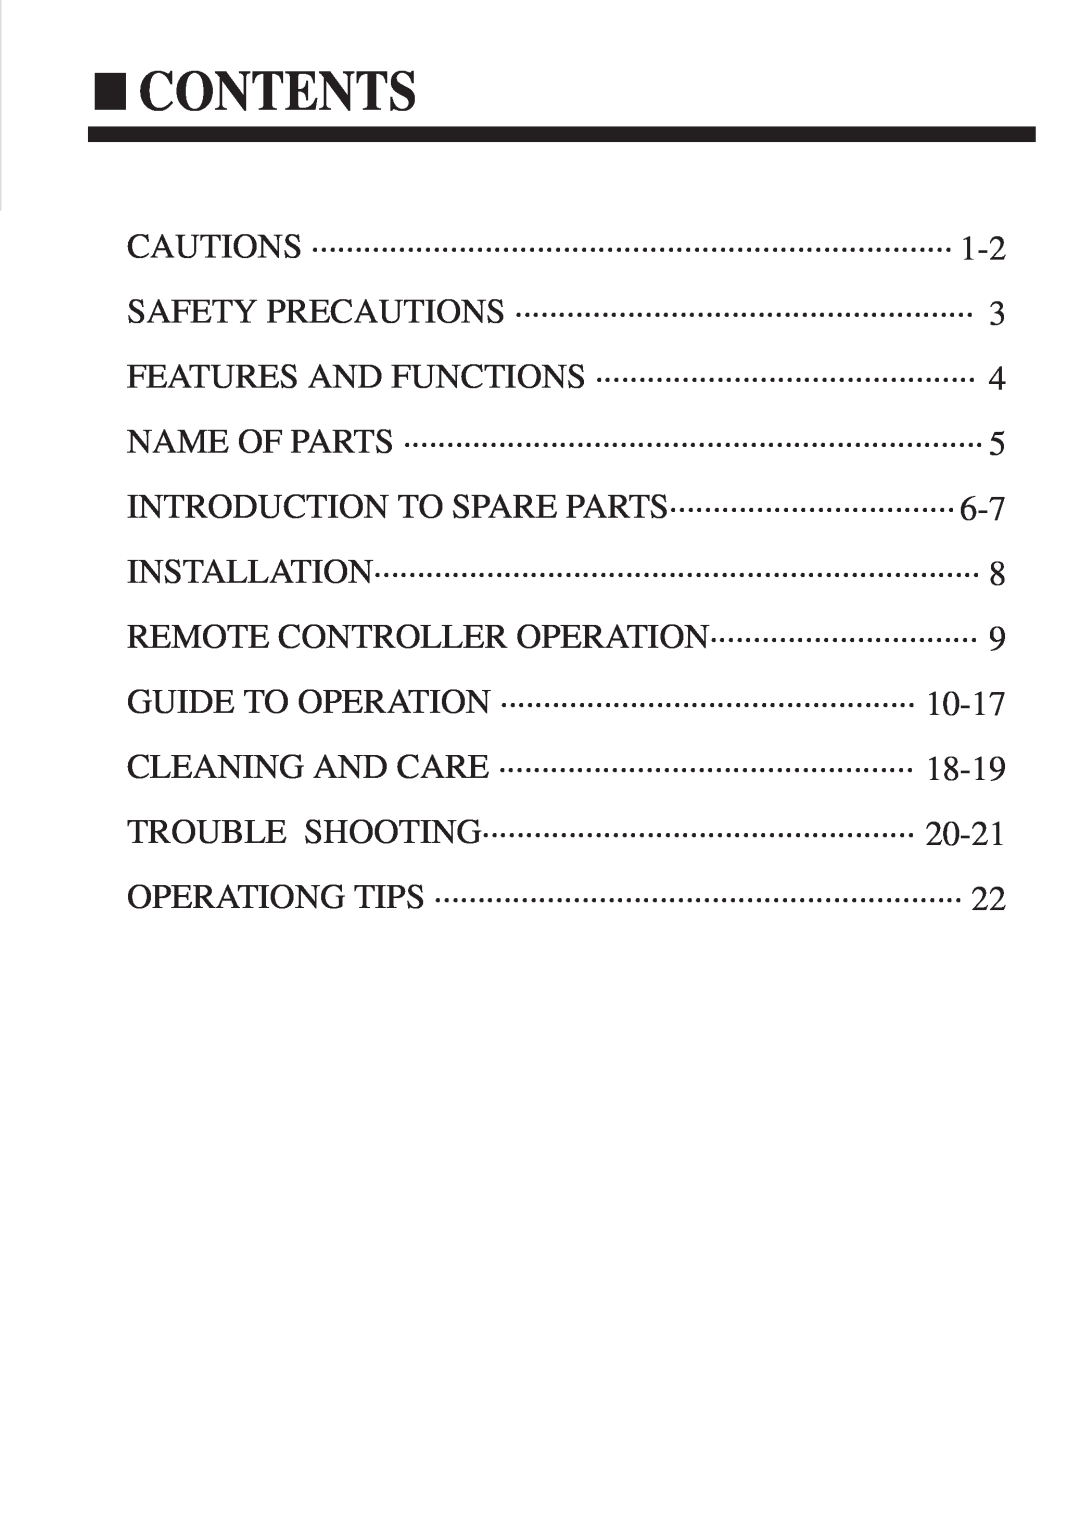 Haier HCFU-42CA13 Contents, Cautions, Introduction To Spare Parts, Guide To Operation, Cleaning And Care, Trouble Shooting 